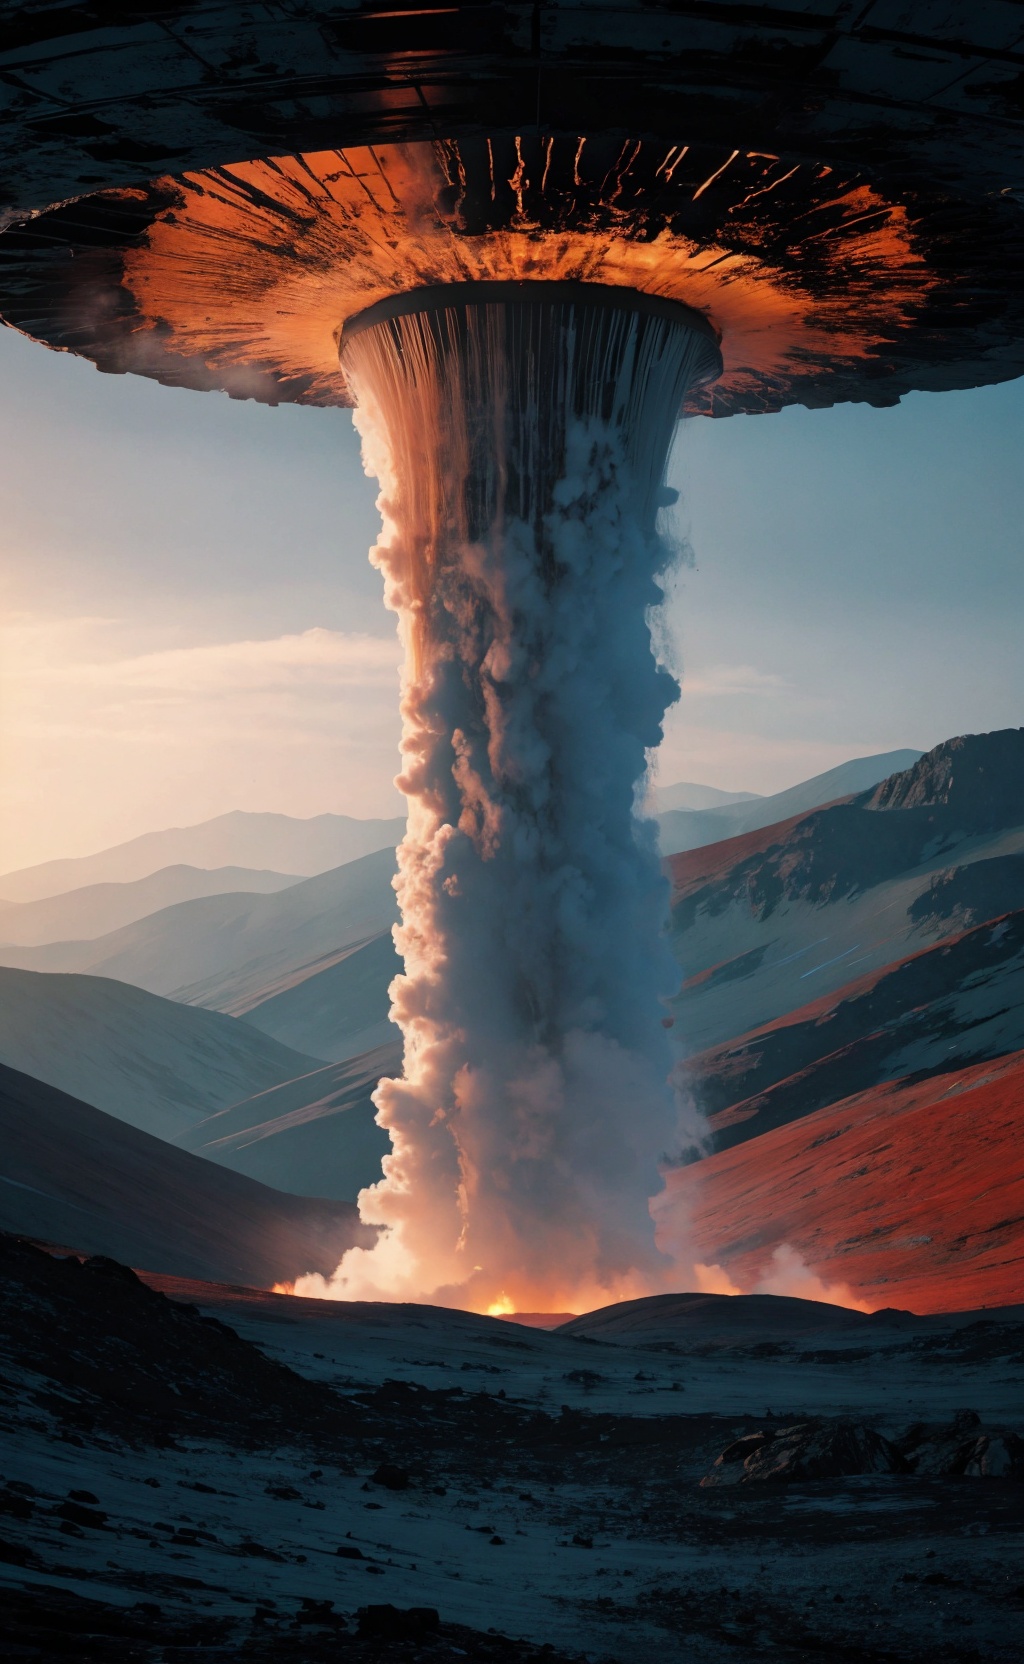 otherworldly-scene, titanic-geysers, hair-raising-atmosphere, alien-weather-systems, 9:16-vertical-frame, hypnotic-landscapes, ultra-realistic-surfaces, contrasting-lights, trending-artstation, honored-creation, Panasonic-Lumix-S1R, 8k-resolution, peaceful, no-humans, extraterrestrial-geysers, towering-plumes, metallic-terrain, shimmering-colors, iridescent-clouds